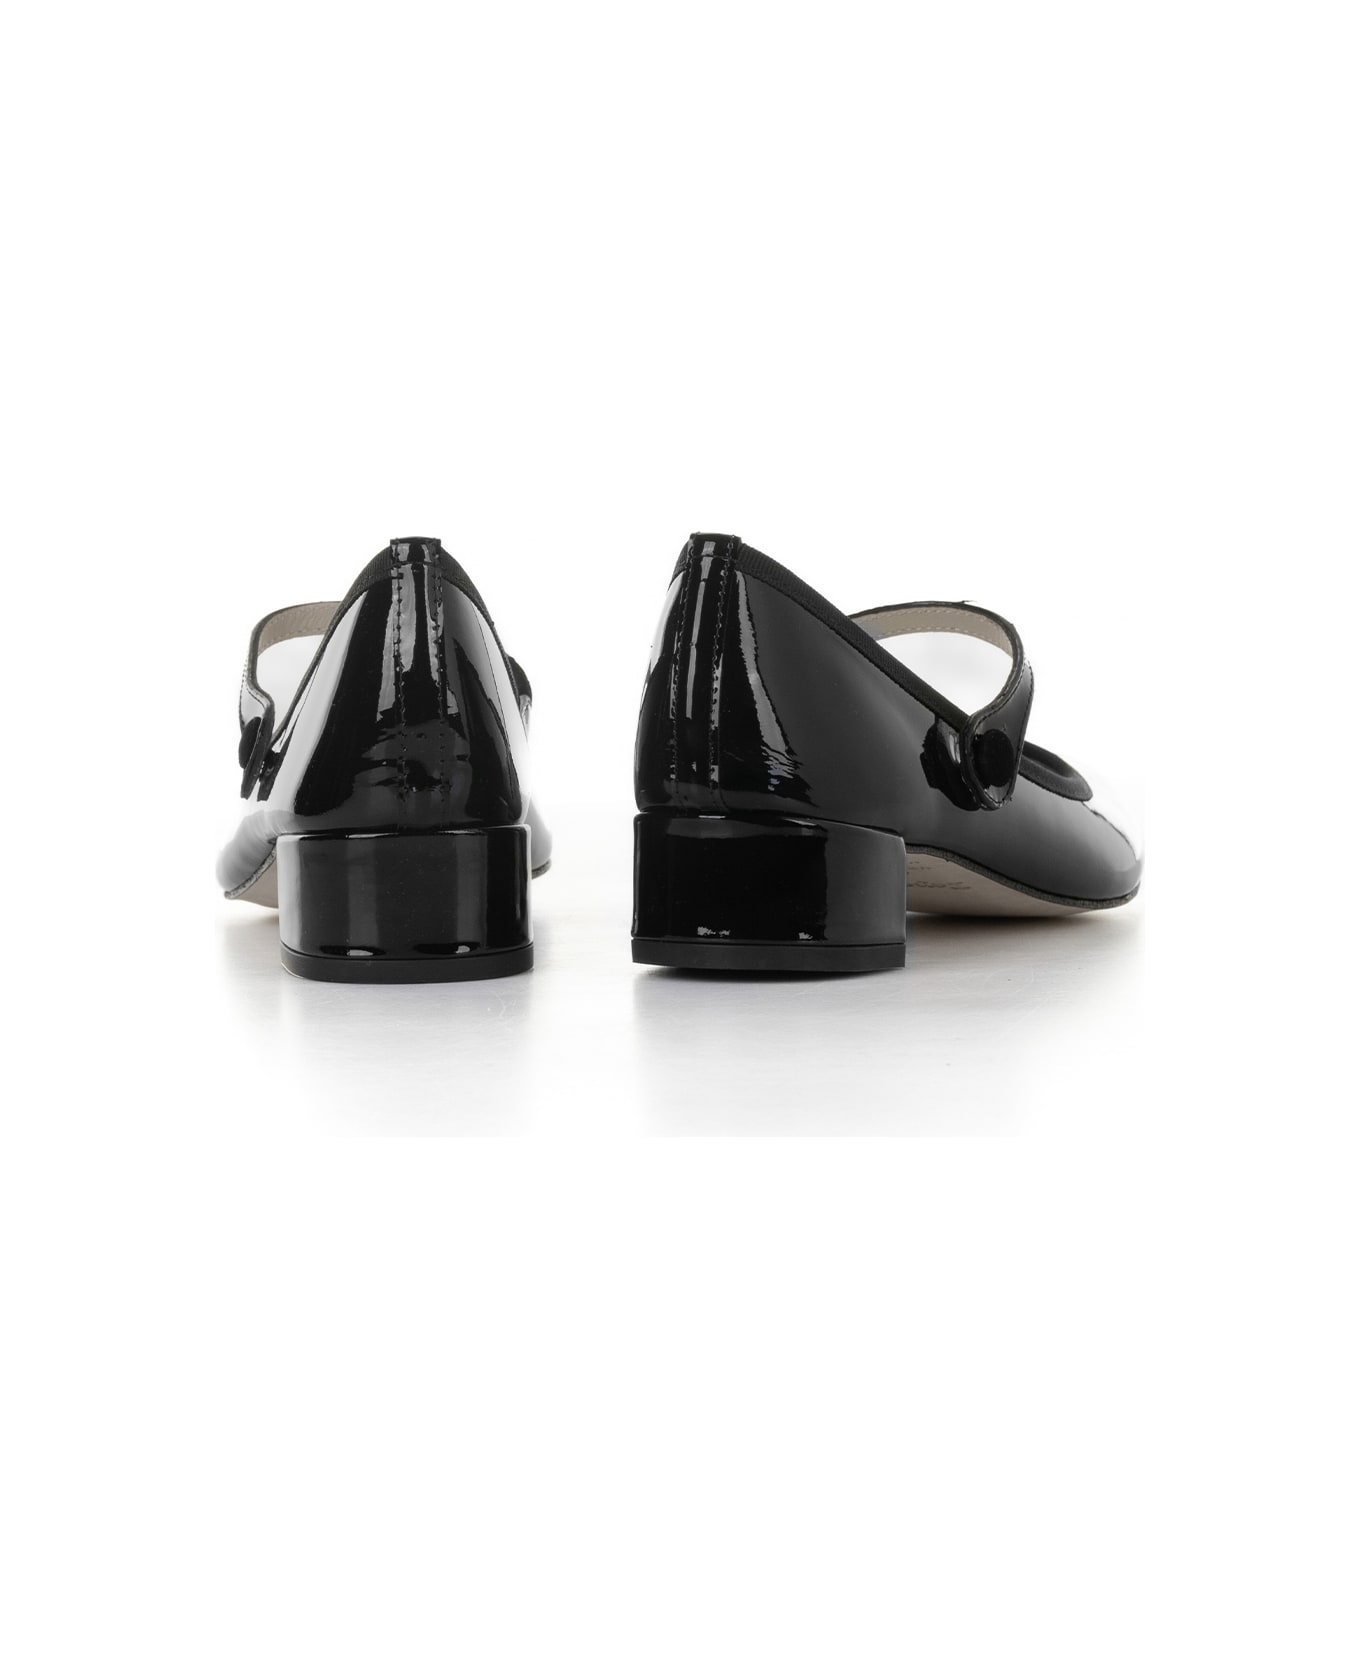 Repetto Ballerina In Shiny Leather With Strap - NOIR